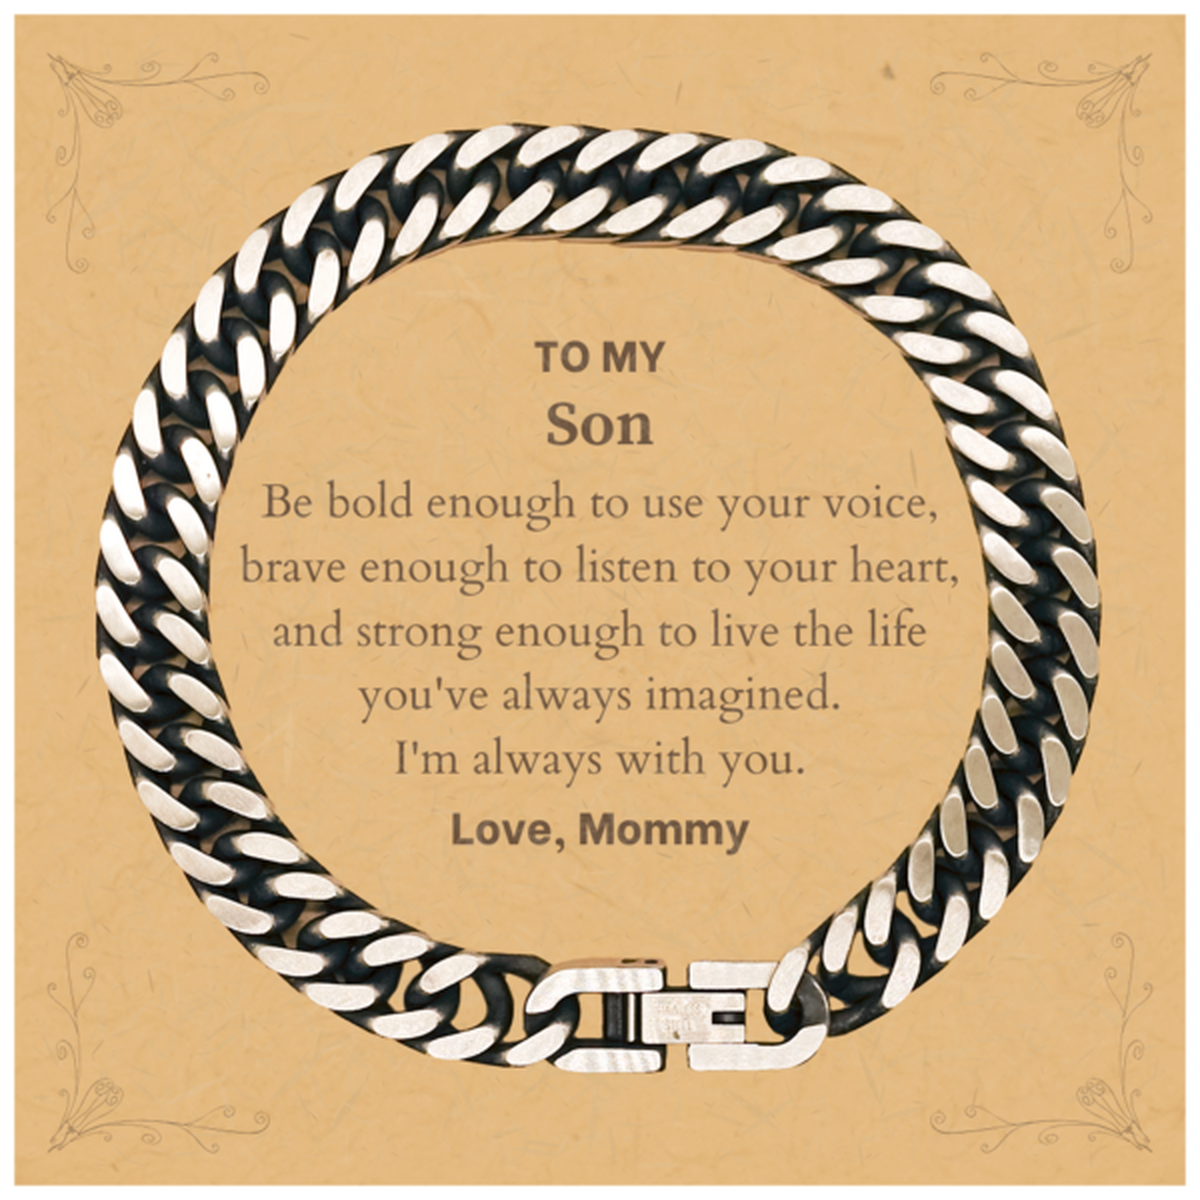 Keepsake Son Cuban Link Chain Bracelet Gift Idea Graduation Christmas Birthday Son from Mommy, Son Be bold enough to use your voice, brave enough to listen to your heart. Love, Mommy